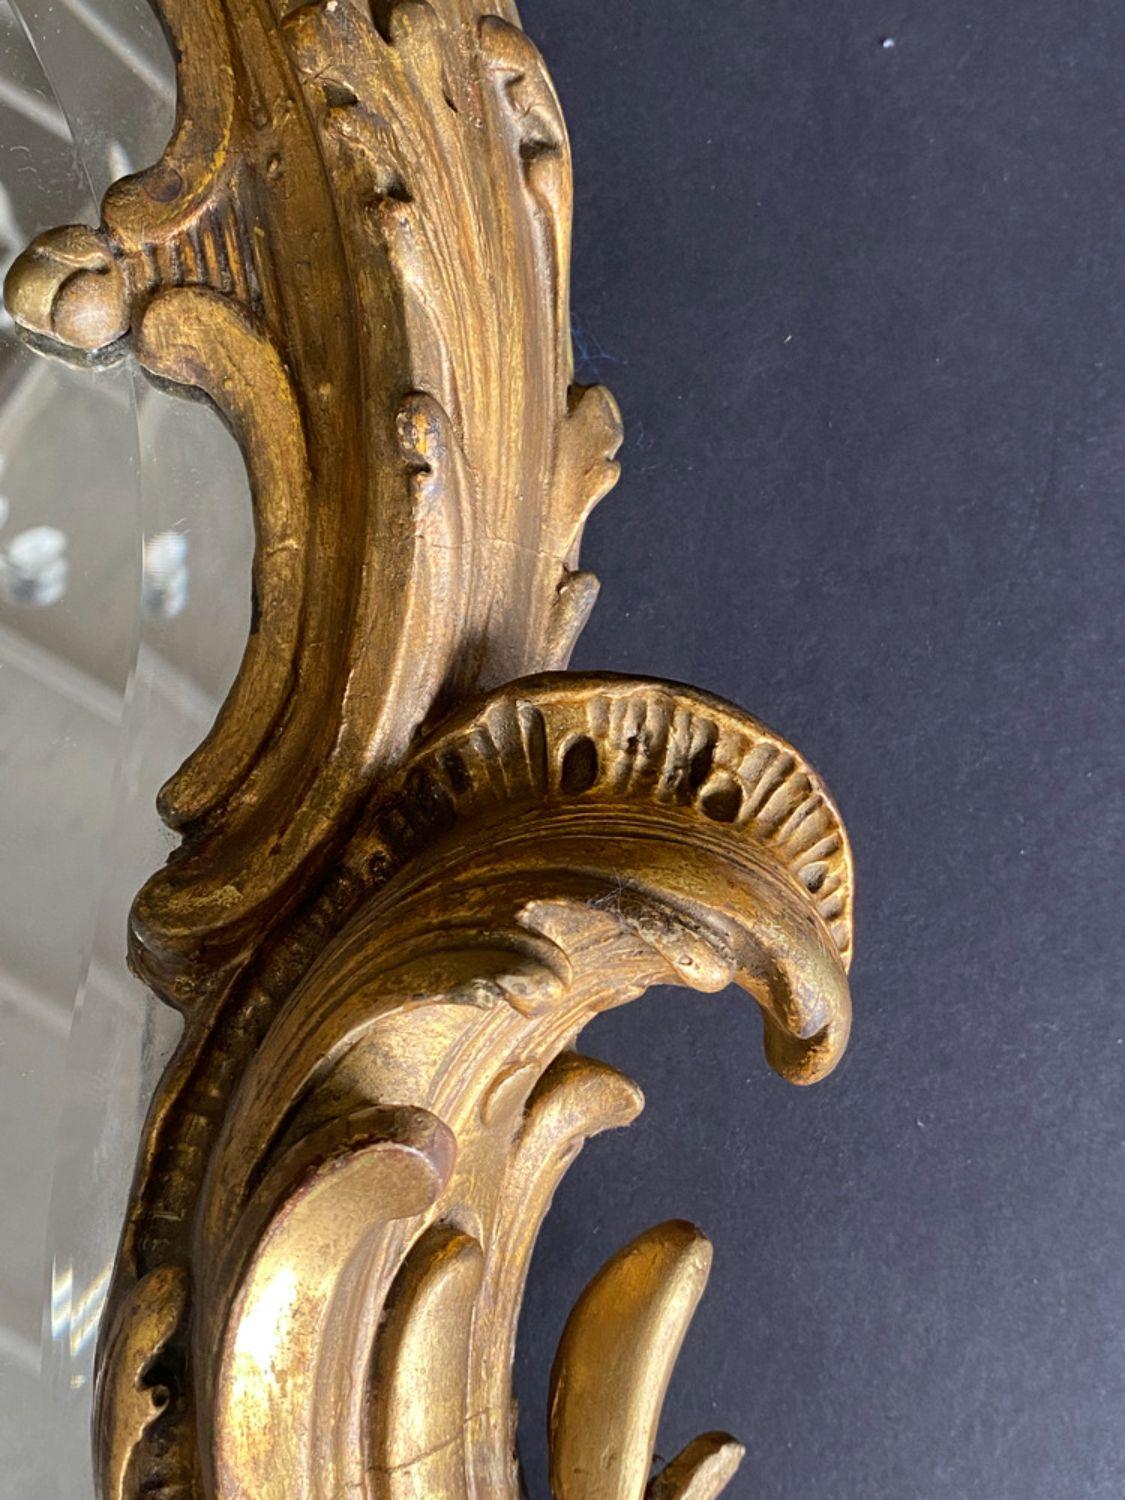 French gilt wall mirror made in the Mid-19th Century.
Dimensions:
53